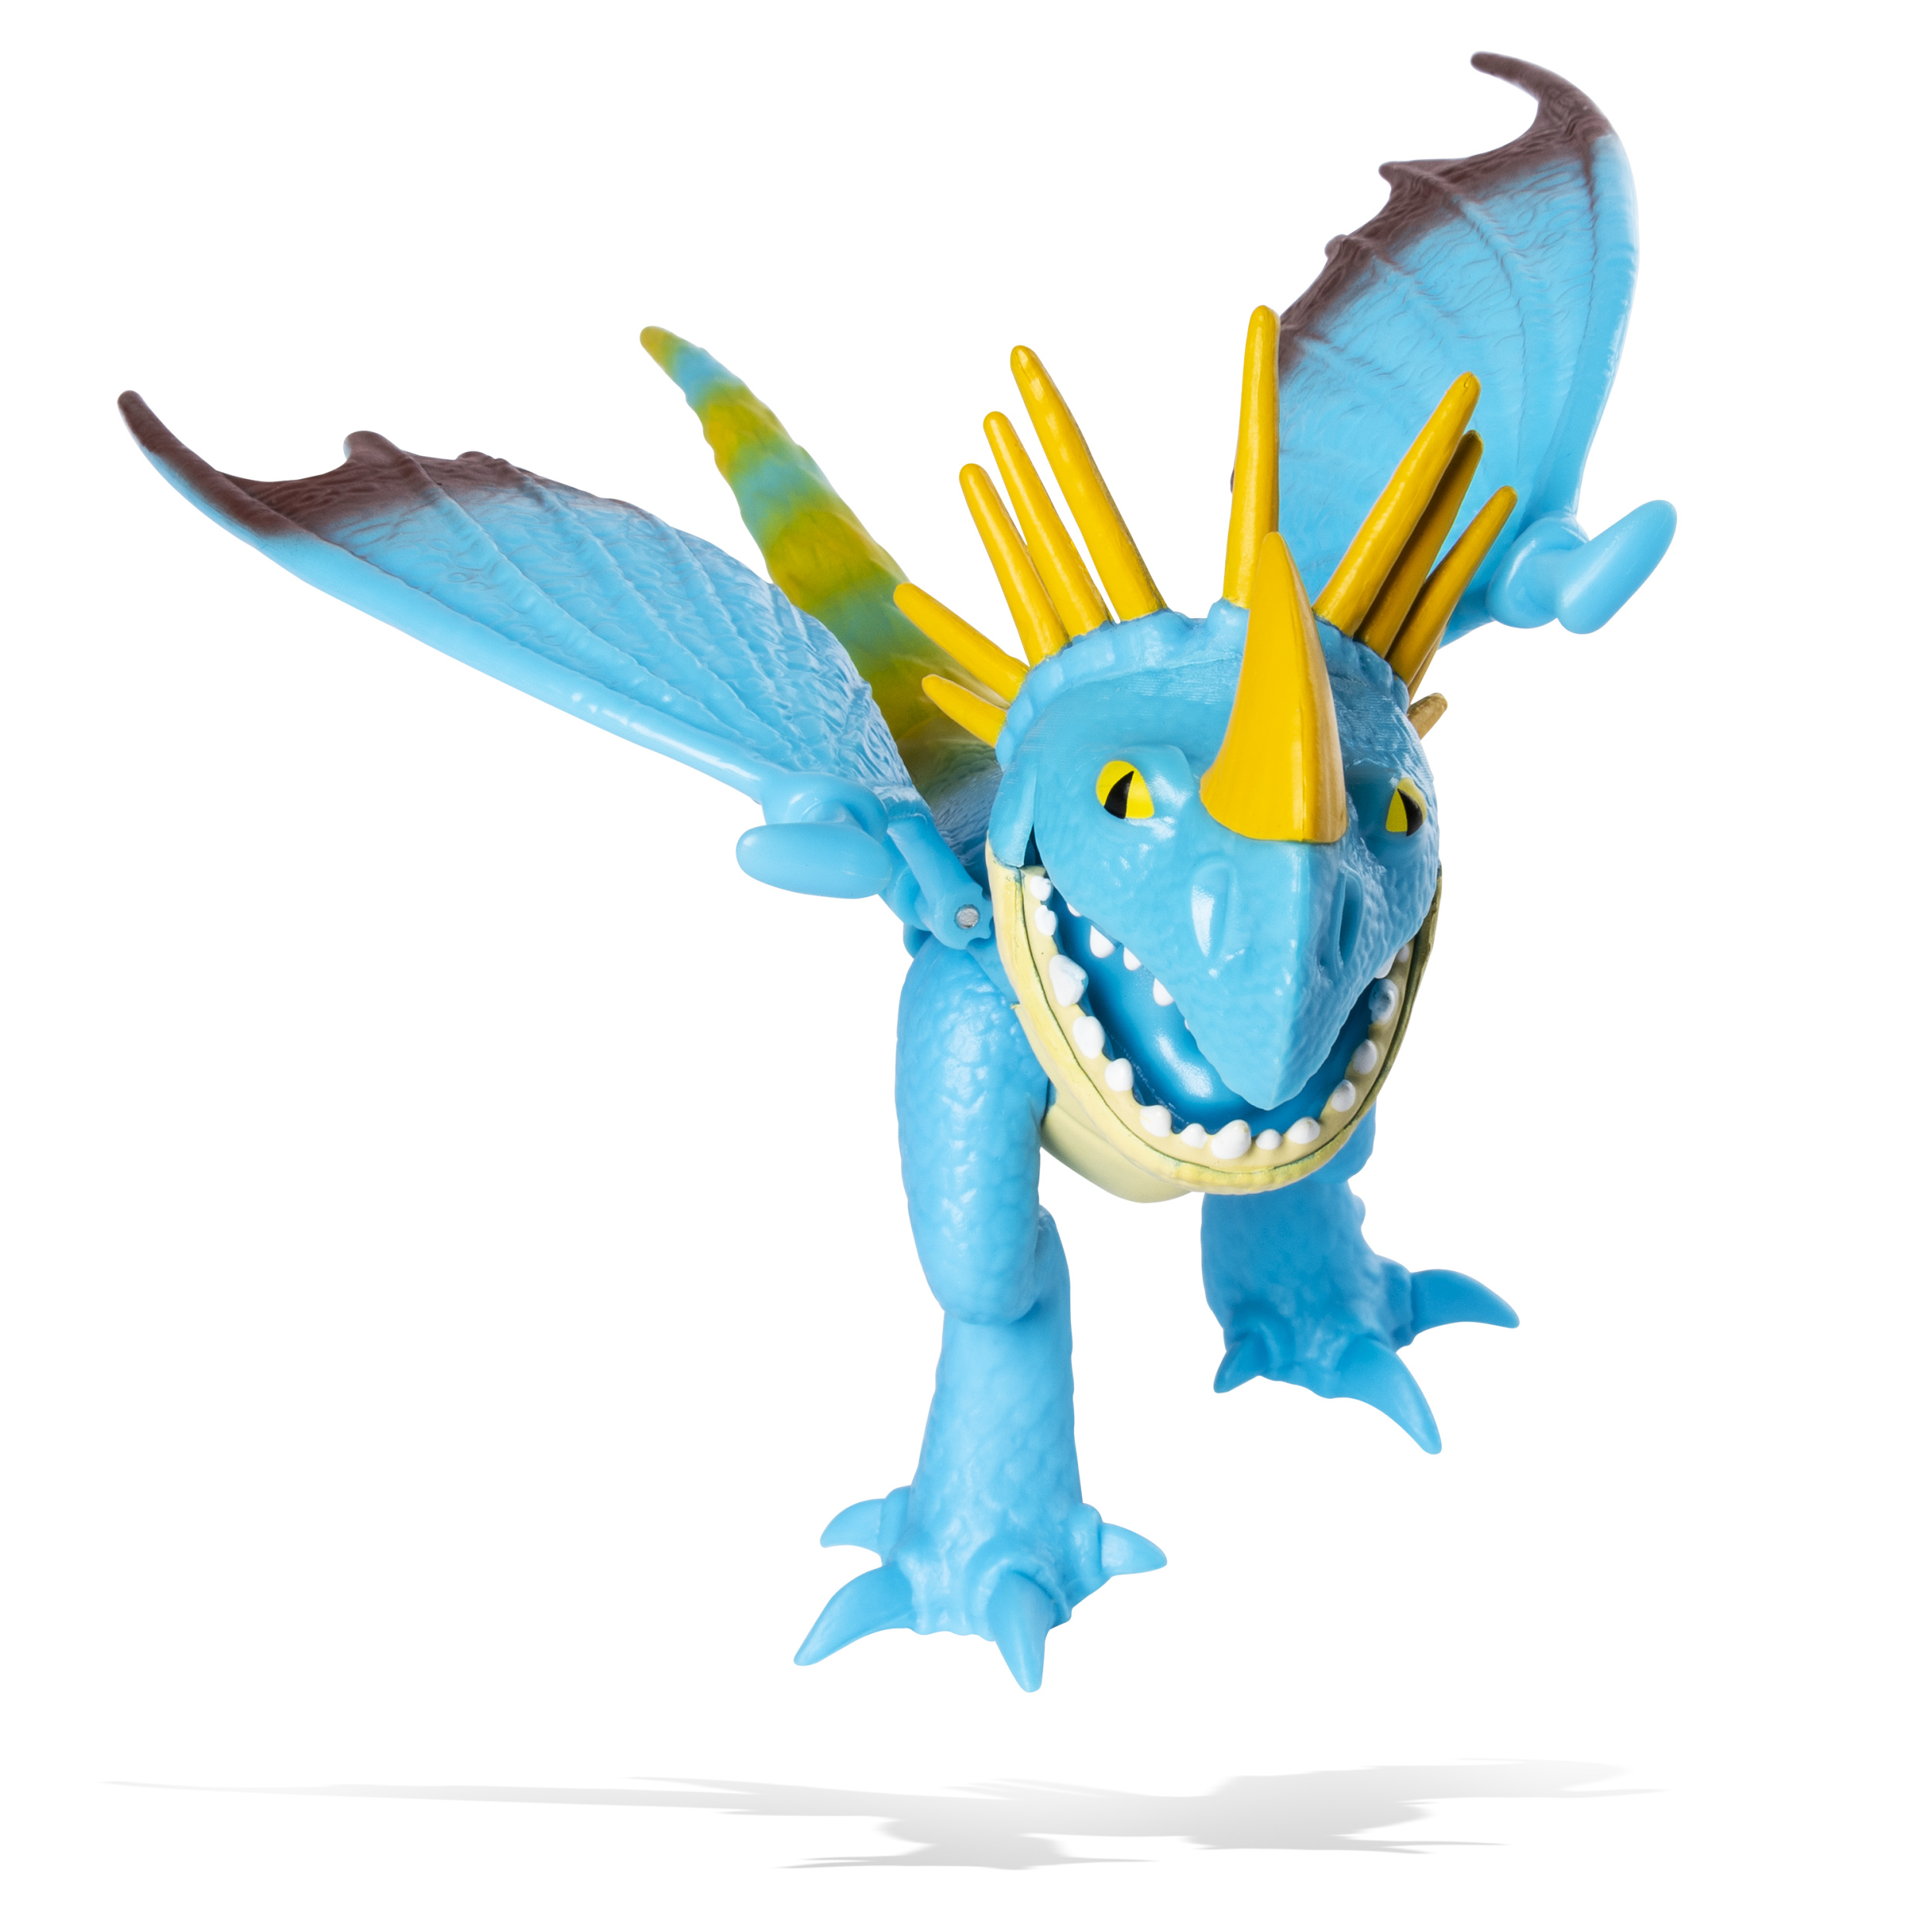 DreamWorks Dragons, Stormfly Dragon Figure with Moving Parts, for Kids Aged 4 and up - image 4 of 4